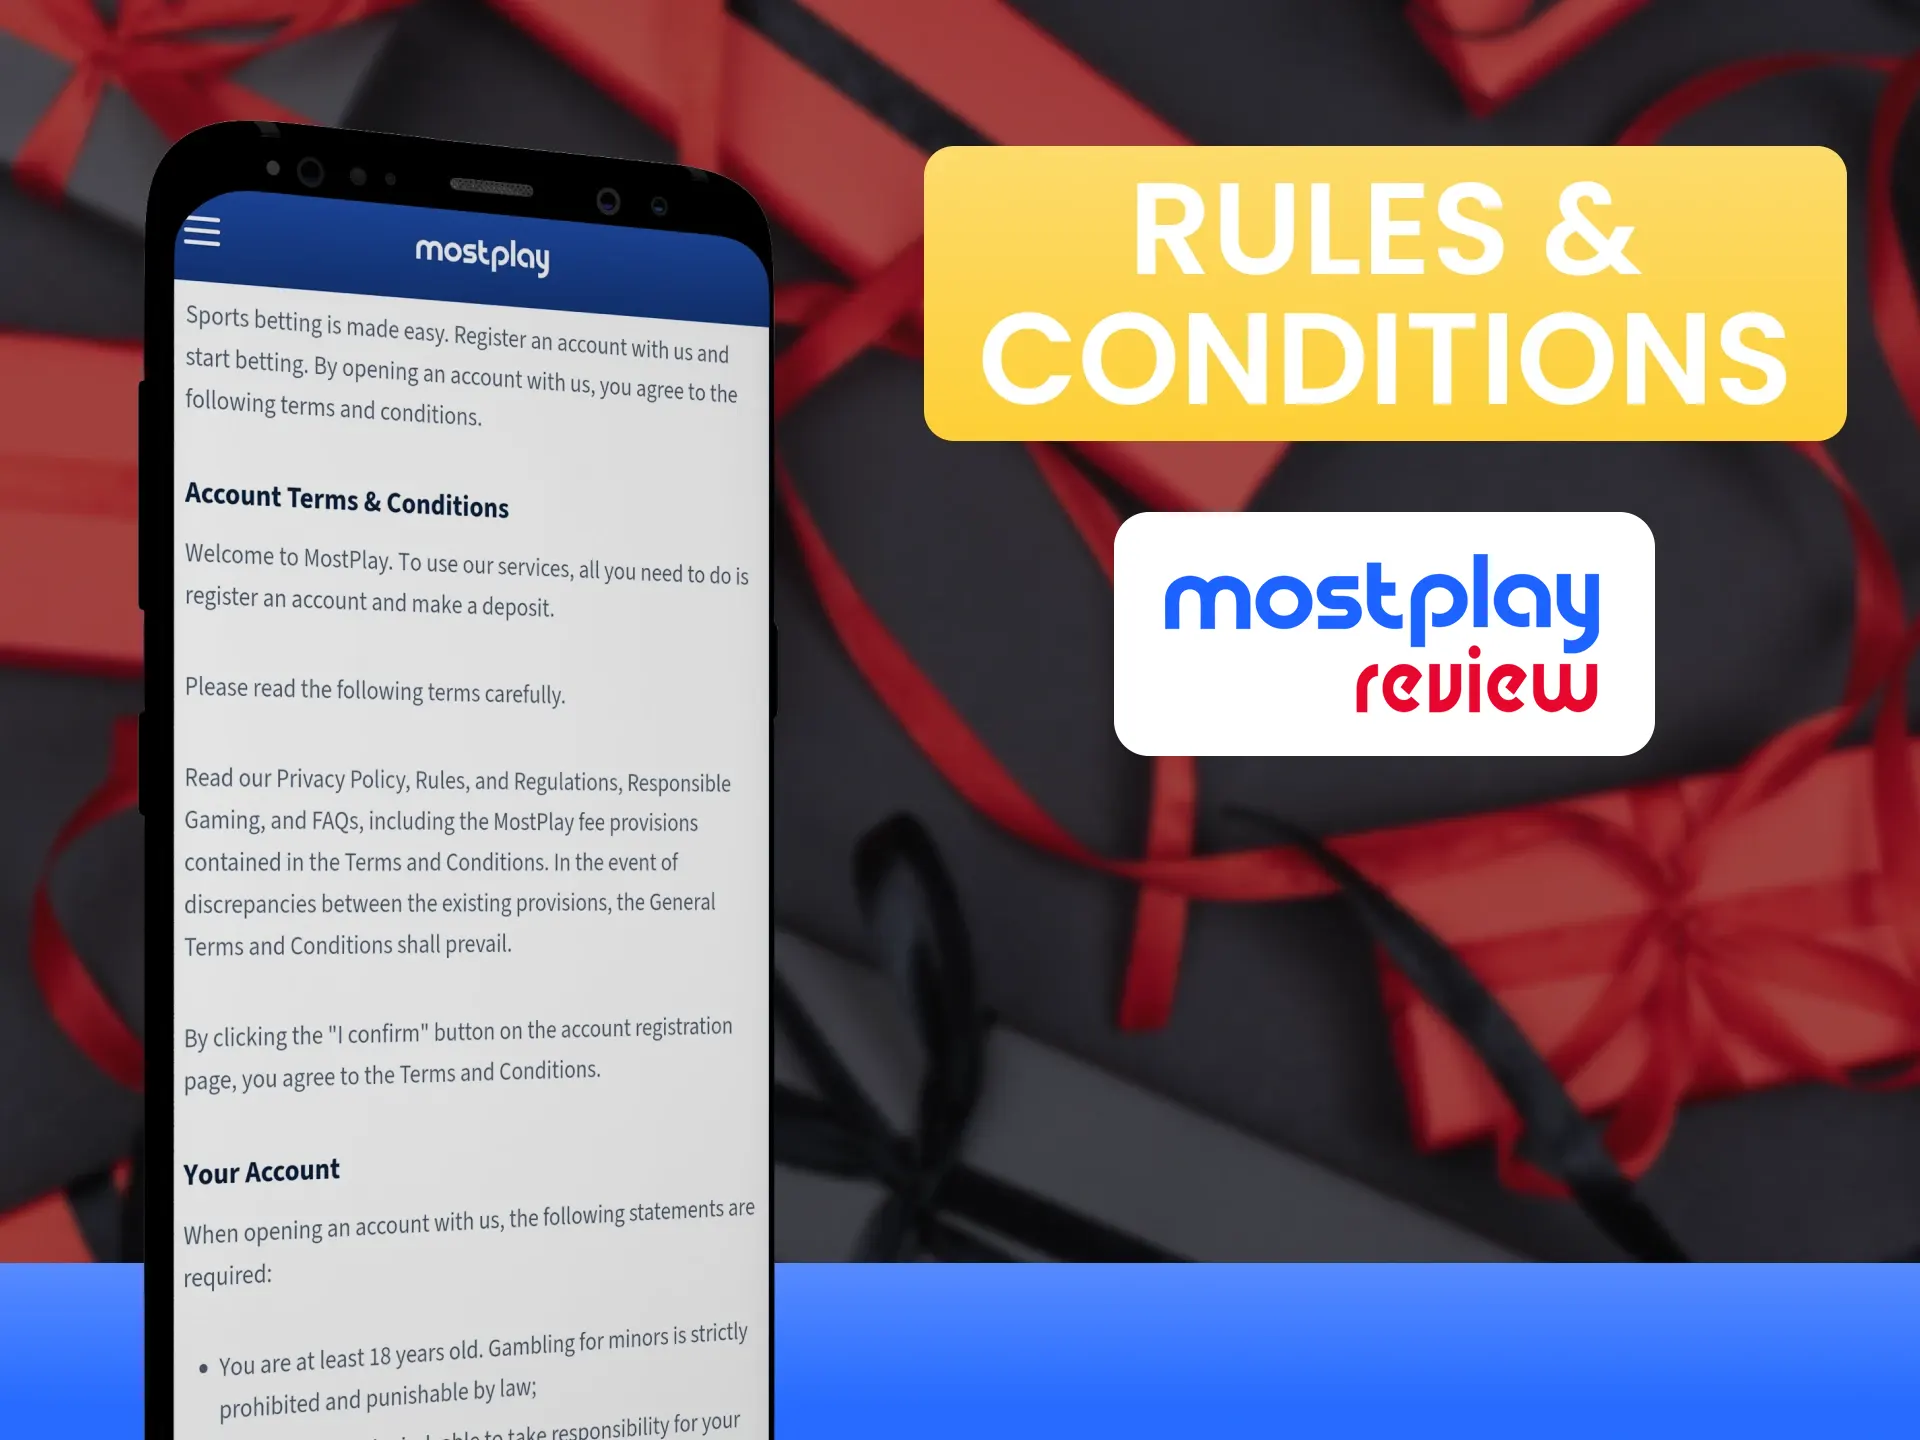 Learn the terms of use of the affiliate program from Mostplay.